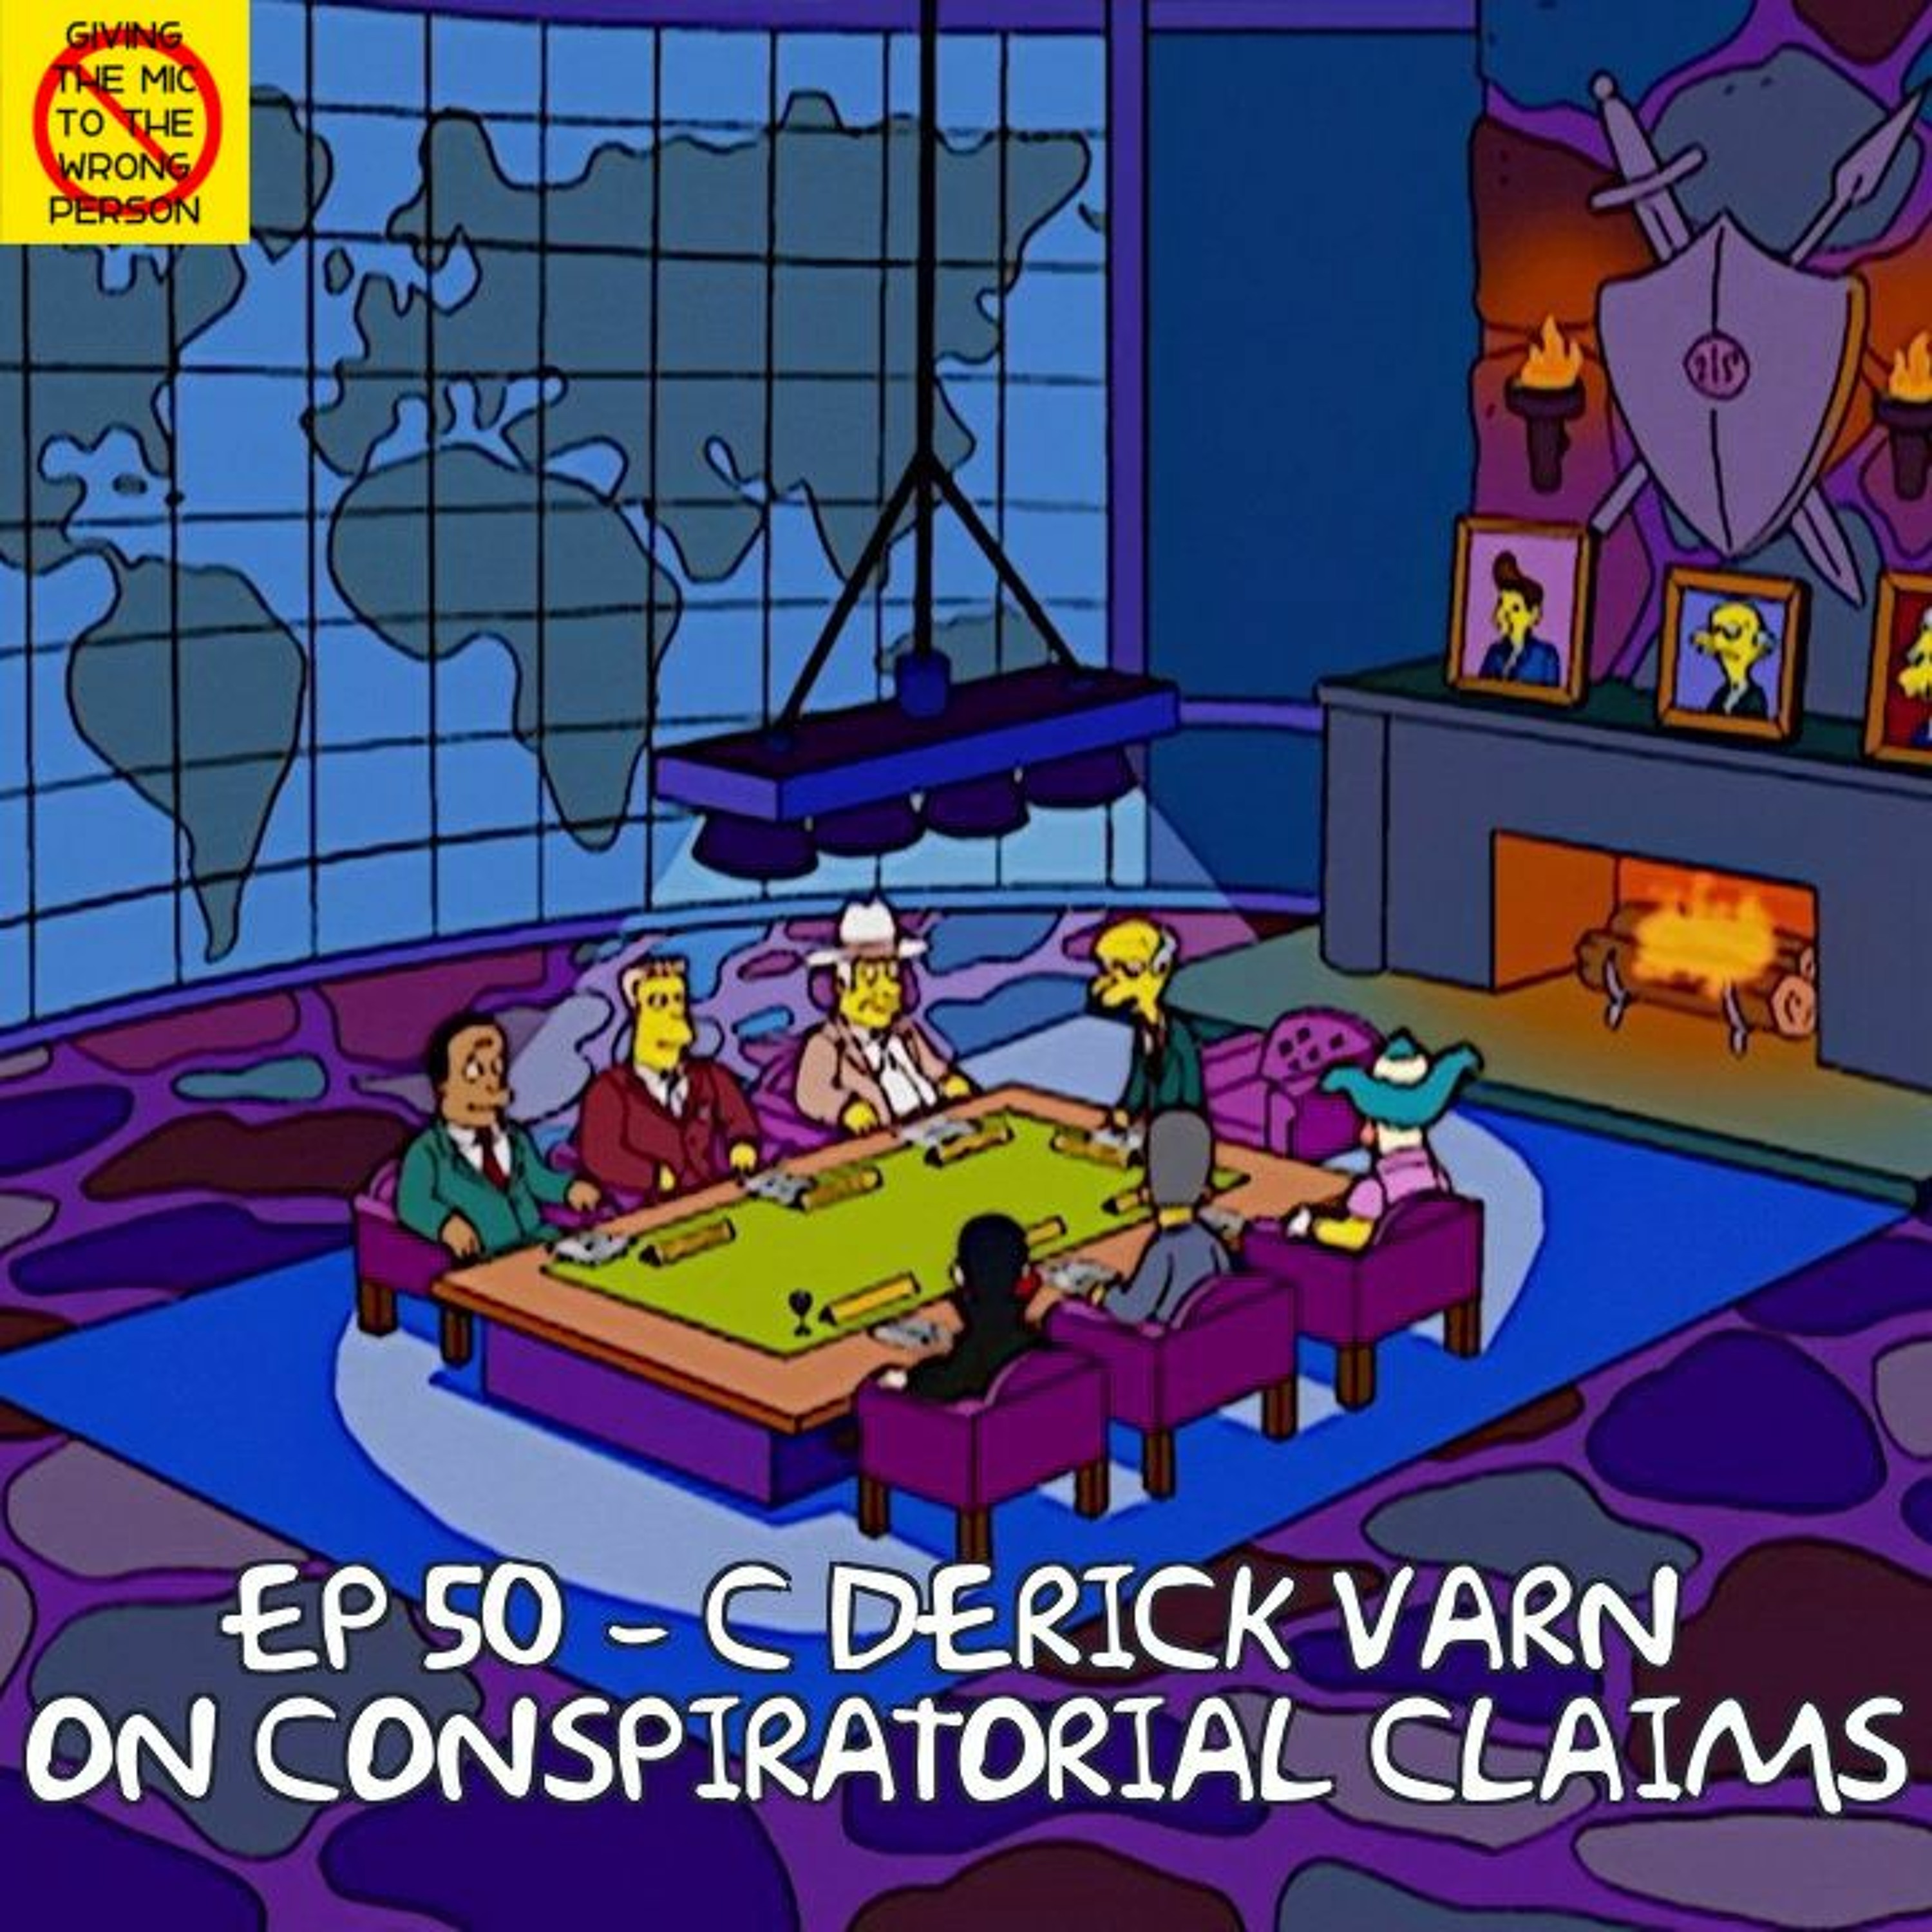 Ep 50 - 5 Rules to Conspiracies with C Derick Varn - Part 1